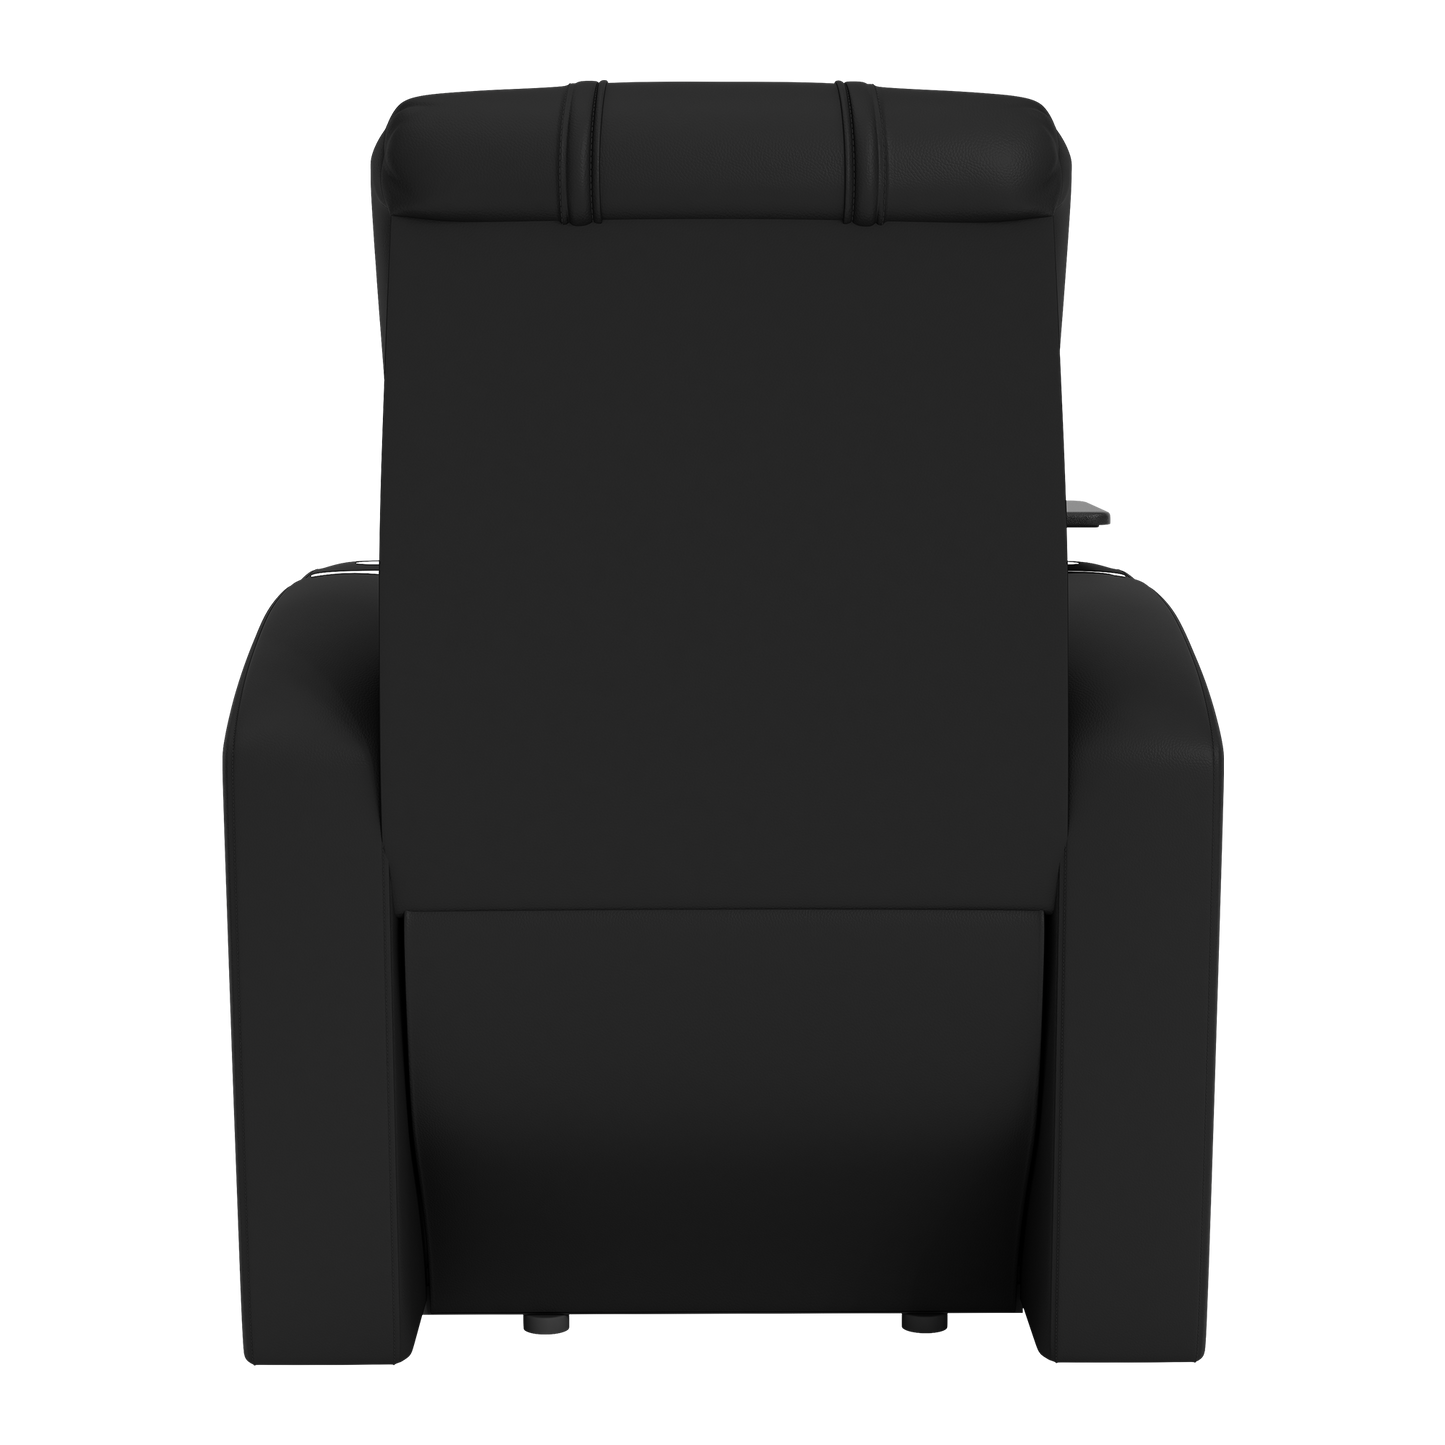 Stealth Power Plus Recliner with Cleveland Browns Helmet Logo